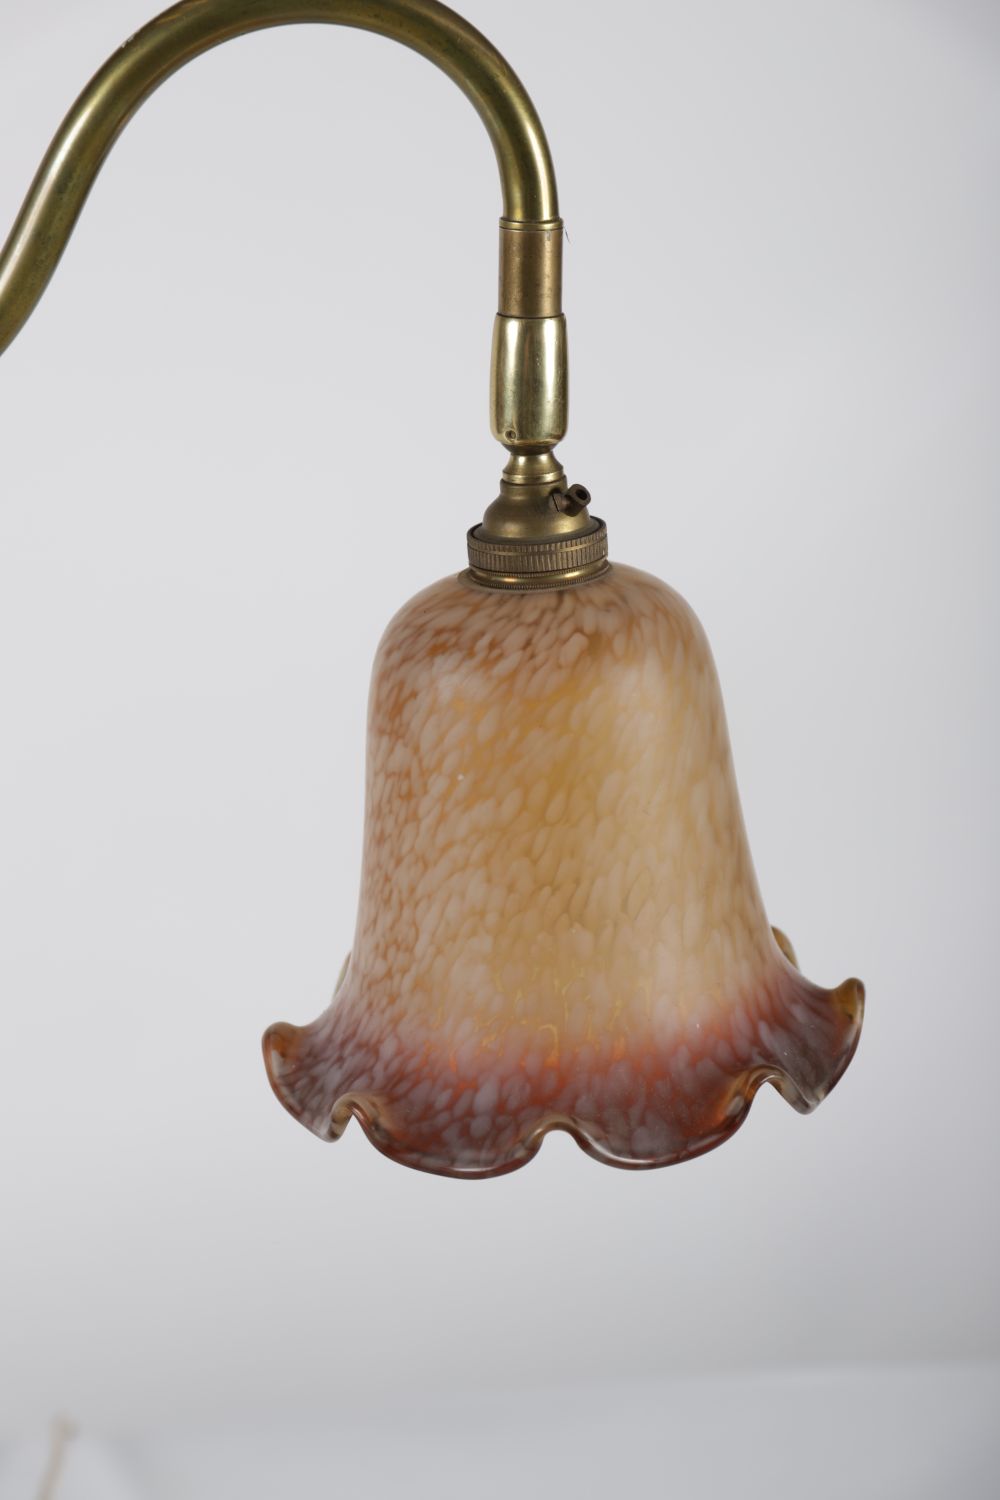 19TH-CENTURY BRASS TABLE LAMP - Image 2 of 3